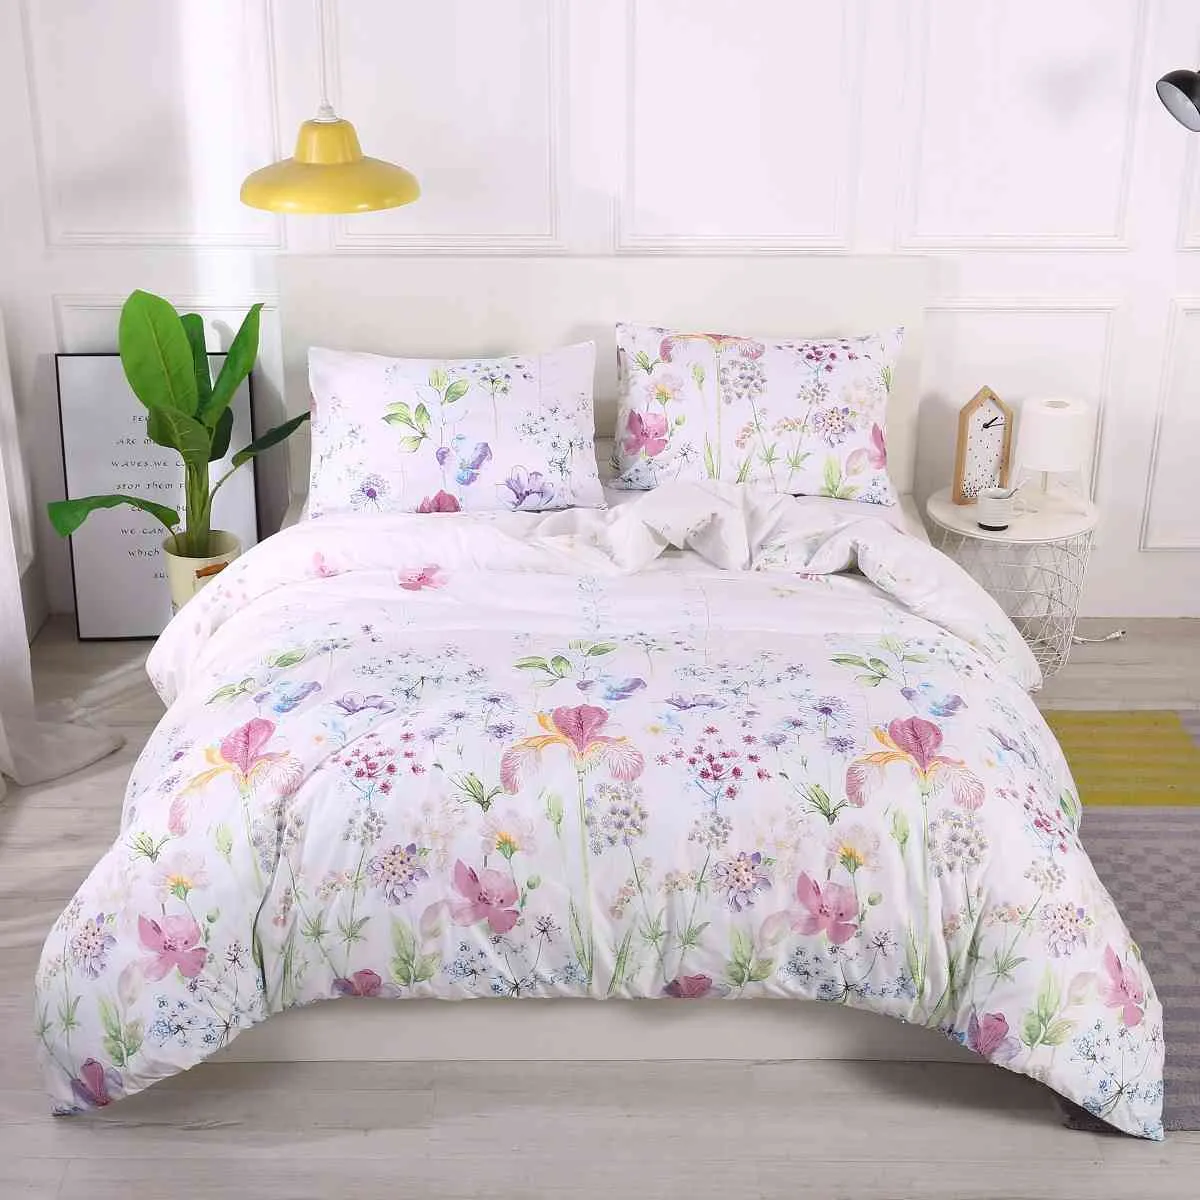 Floral Classic Modern Duvet Cover och Pillowcase Concise Style Beding Textile Bed Set Inga lakan